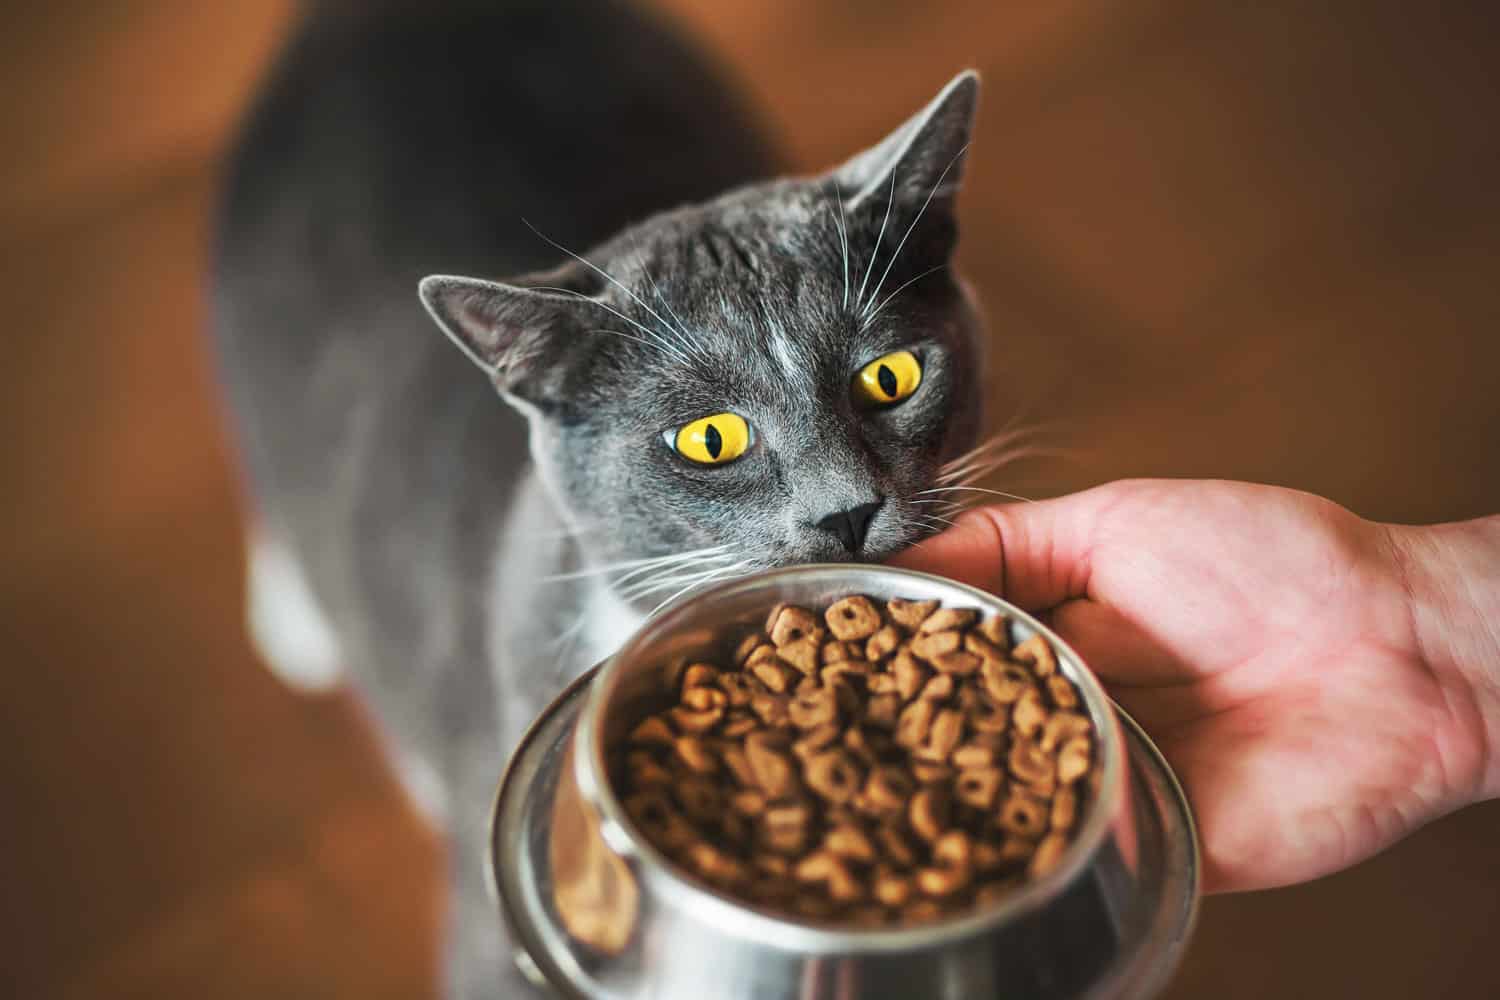 A grey domestic hungry cat with yellow eyes looks at a bowl of food held in the hand of a man. Pet feeding.
